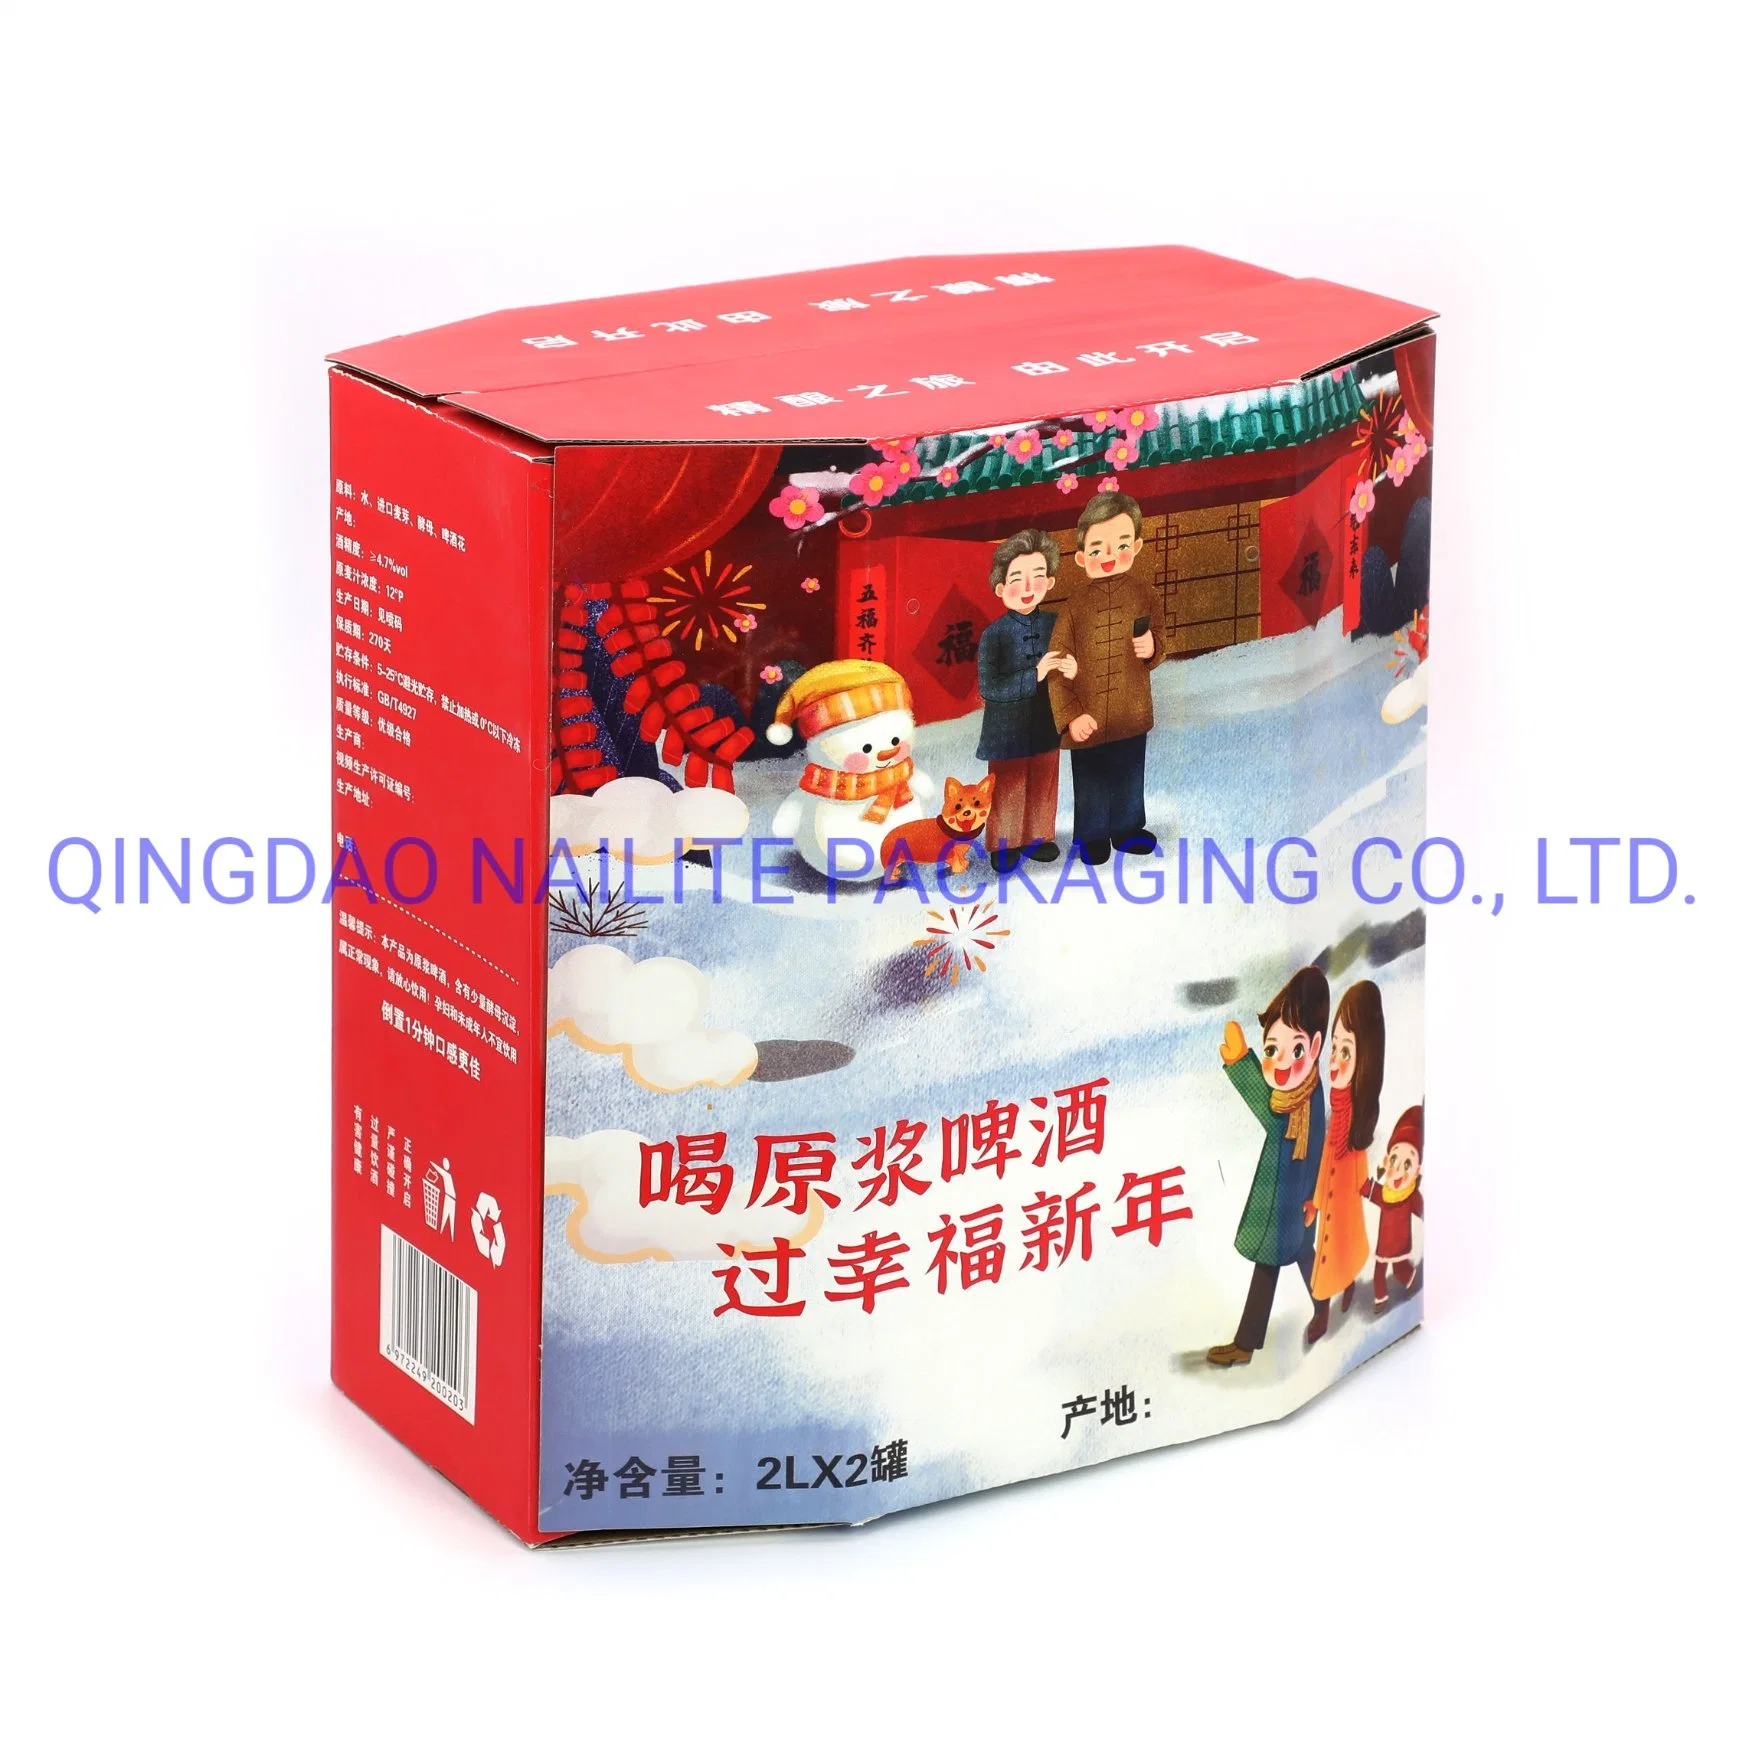 Customized Kraft Corrugated E/B Flute Paper Package-Packaging for Instant Food/Canned Beer/Noodles/Pasta/Dumpling/Snack-Gift Box of Fruit/Beverage/Tea/Cookie